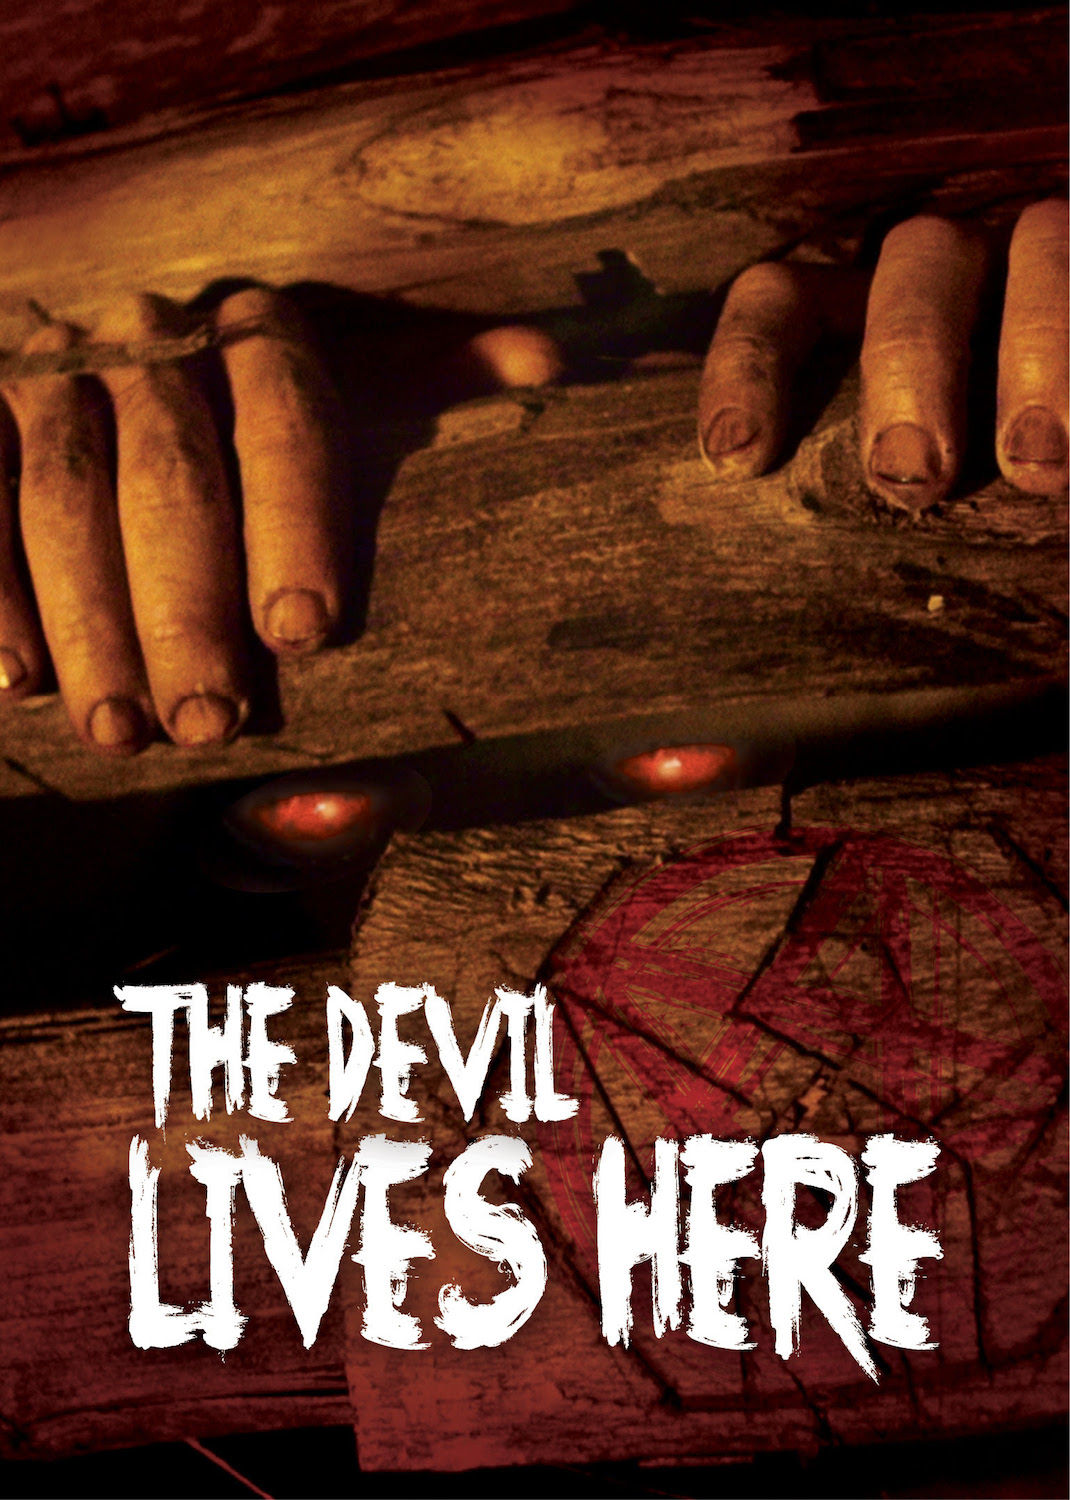 The Devil Lives Here Coming To DVD and VOD